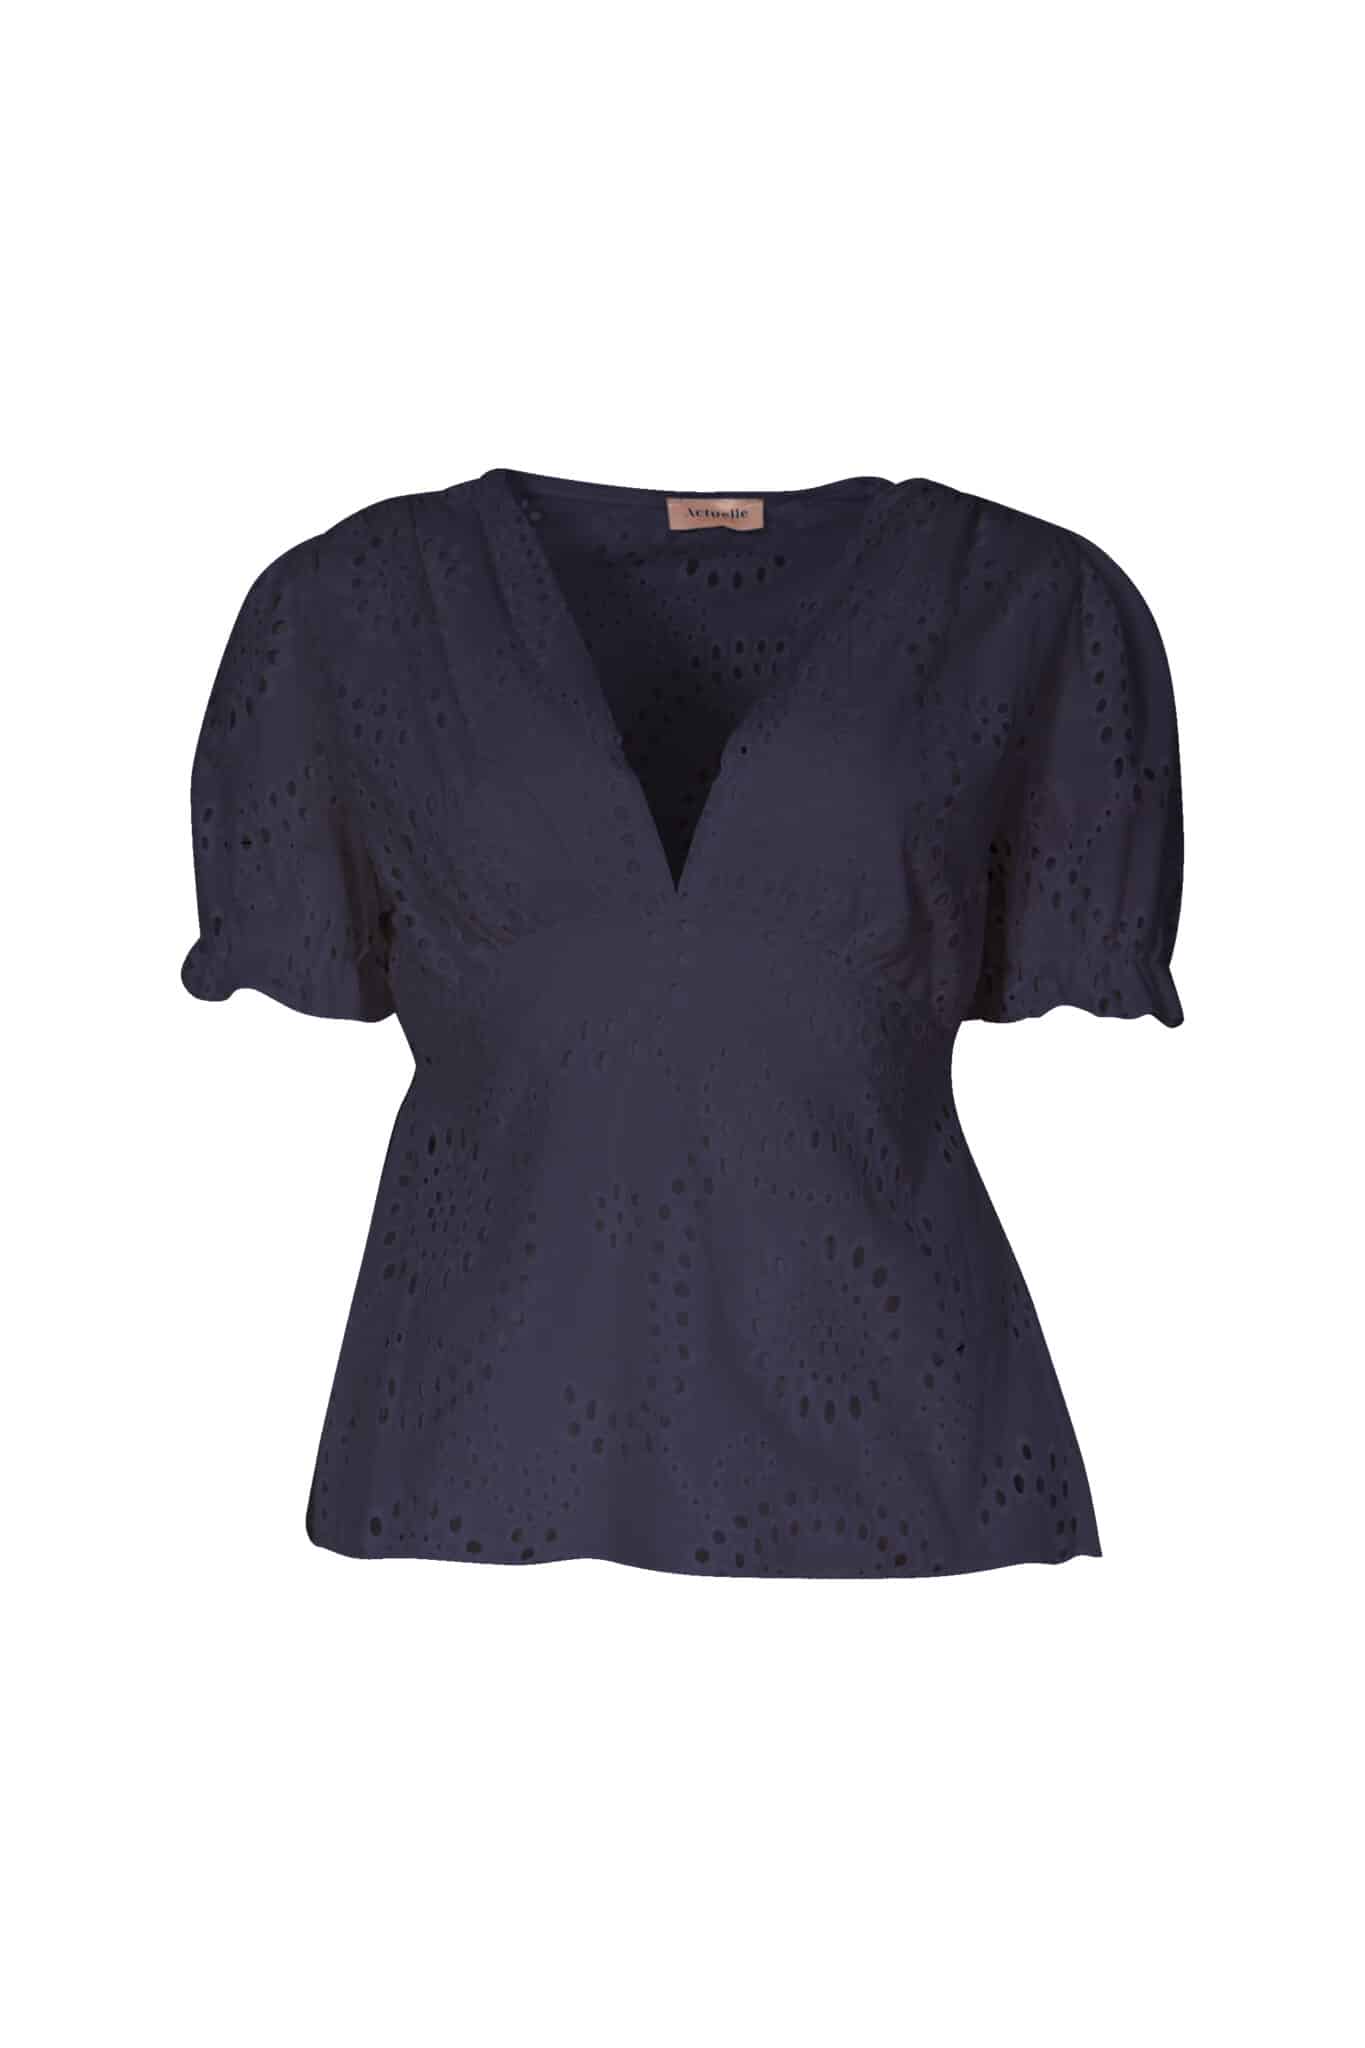 blouse broderie anglaise col v marine